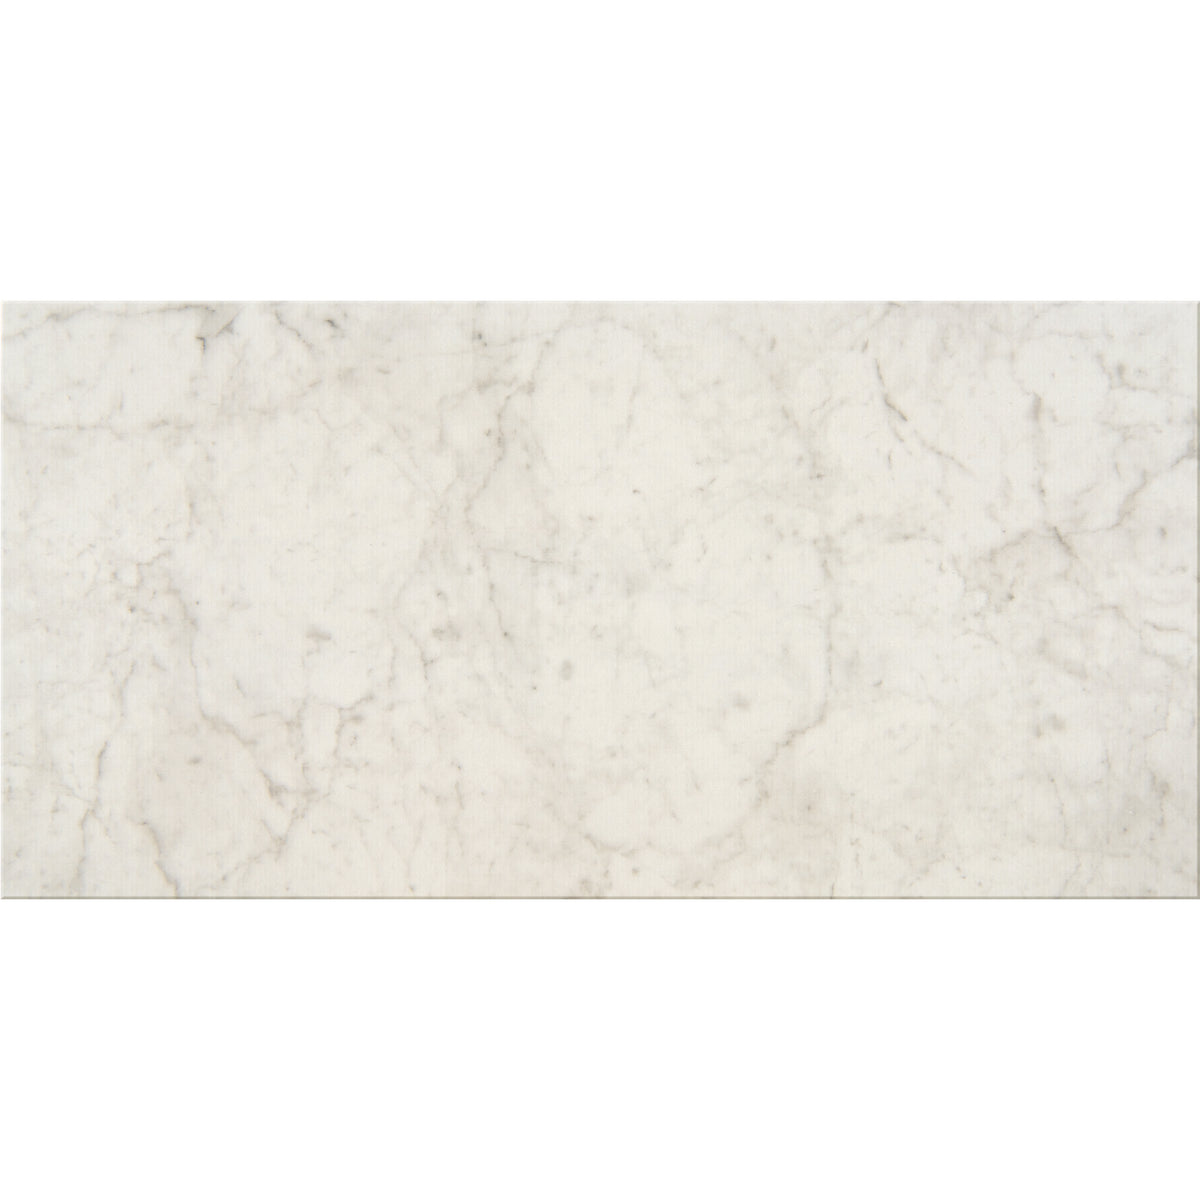 American Olean - Mythique Marble 12 in. x 24 in. Colorbody Porcelain Tile - Altissimo Polished